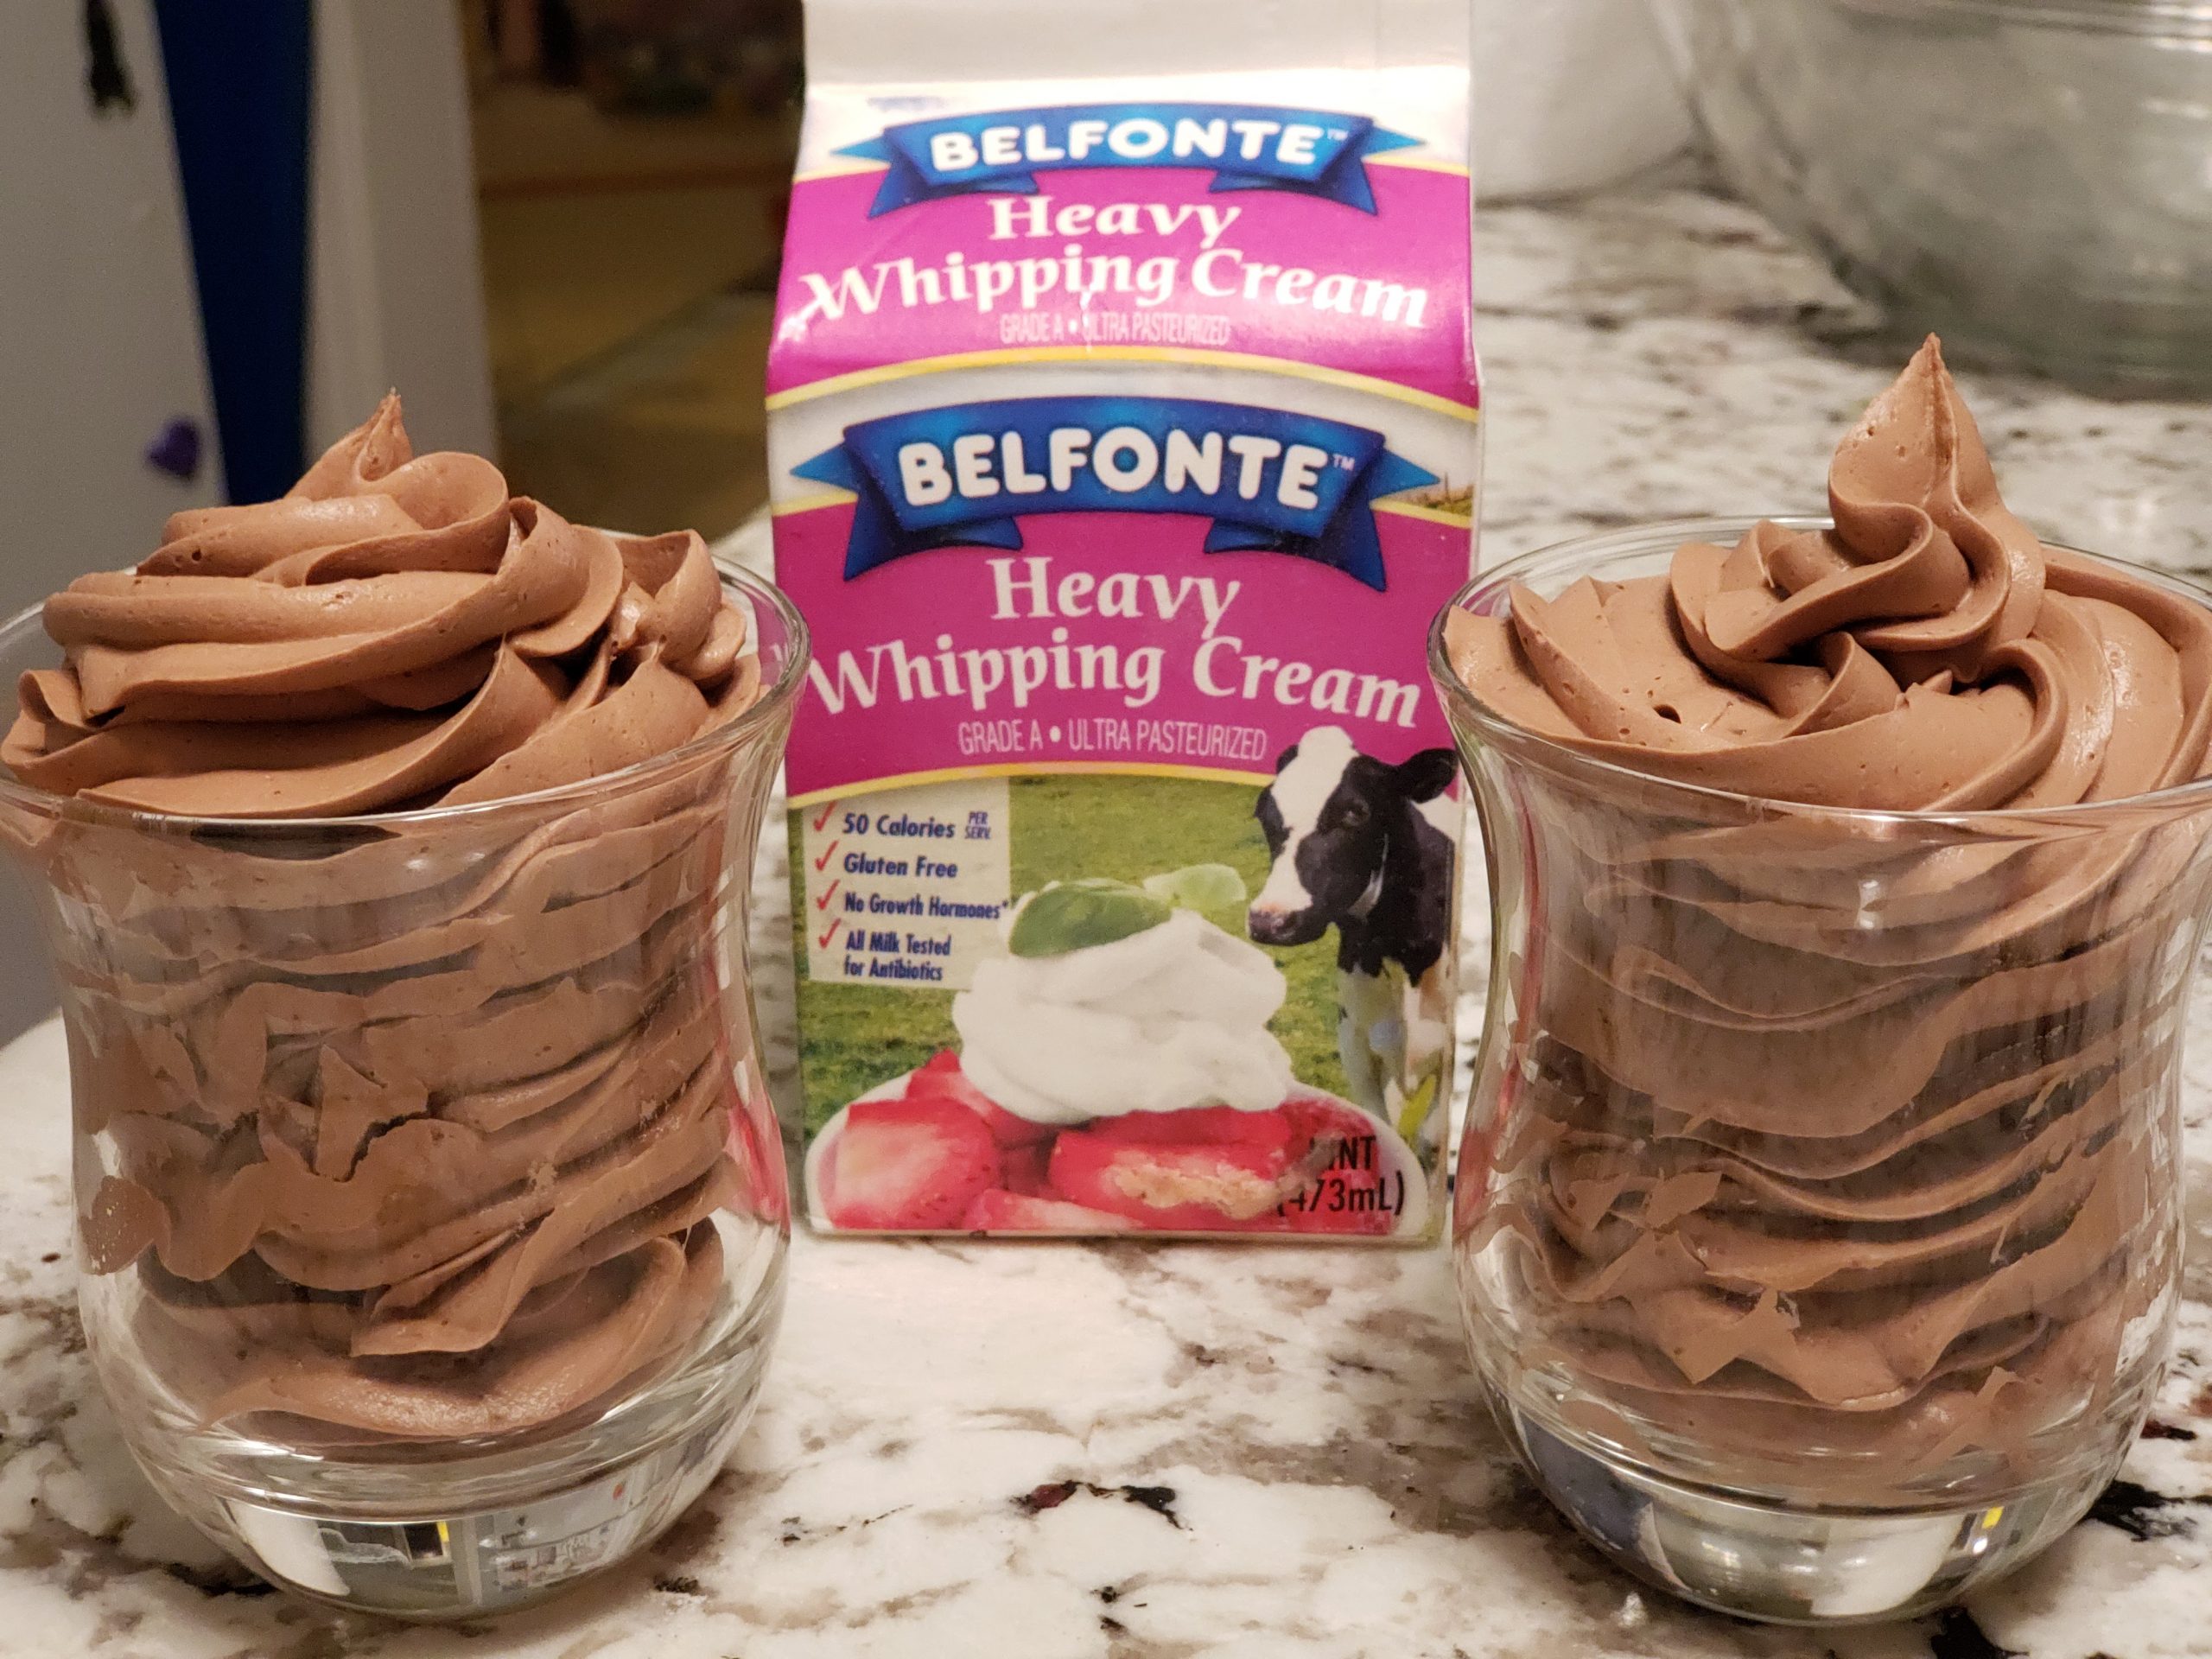 Creamy Chocolate Mousse with Heavy Whipping Cream